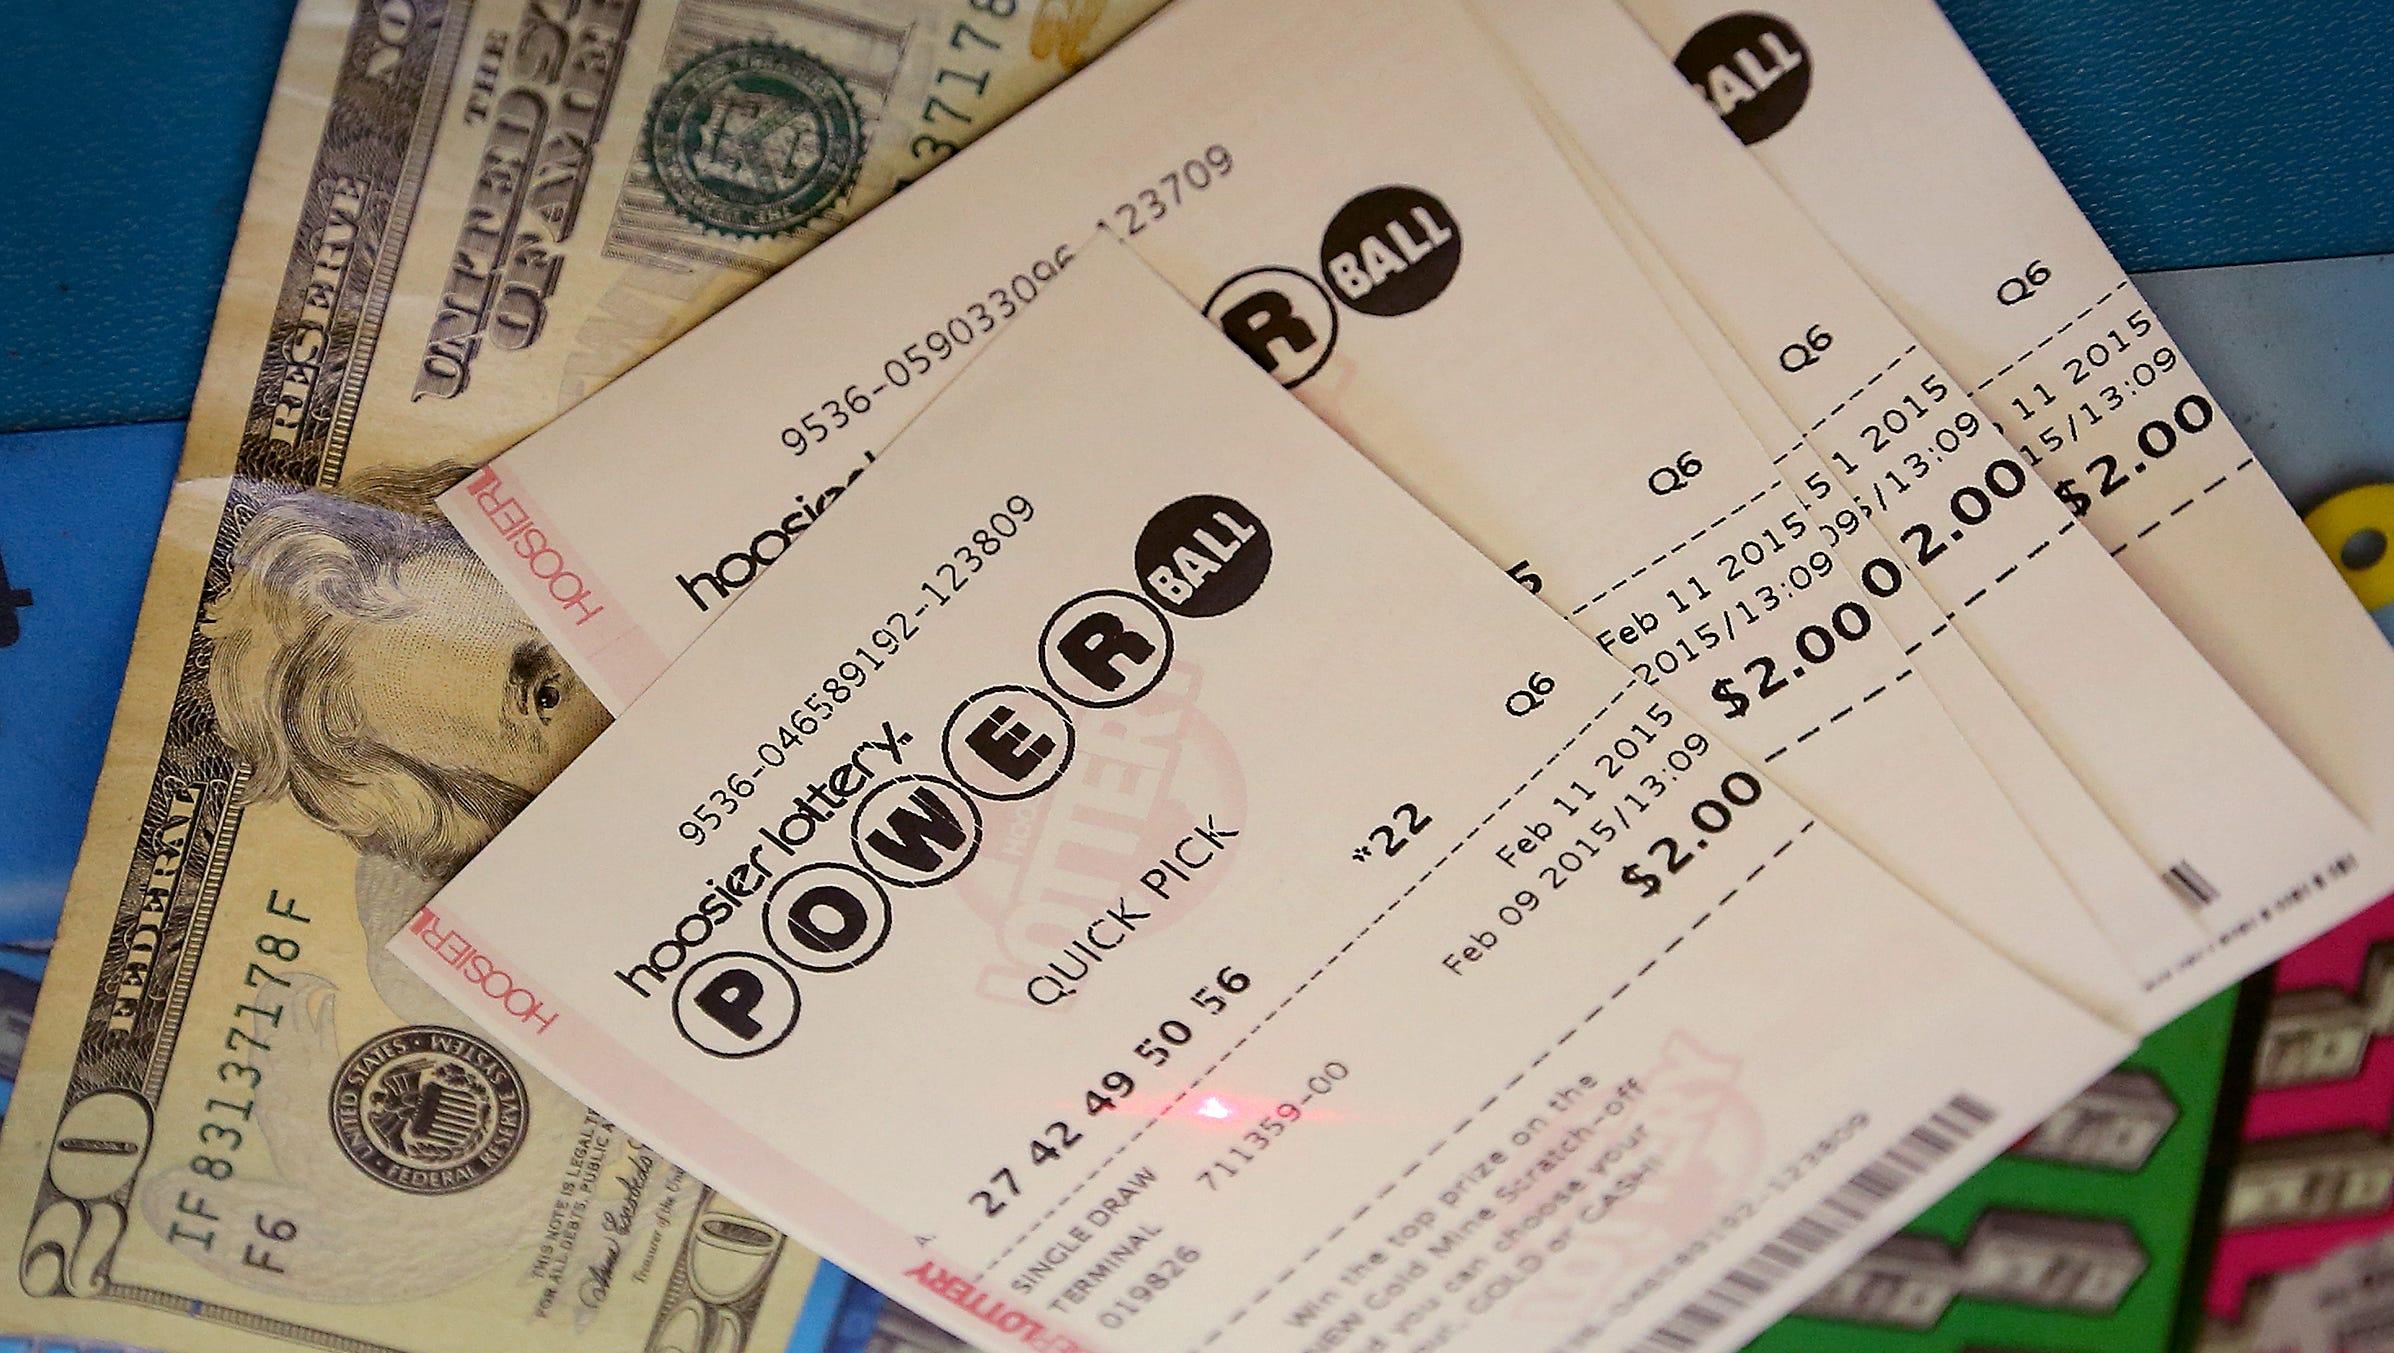 The current estimated Powerball Jackpot at $450 million, with the cash value at $304 million, tickets are selling fast at Buck